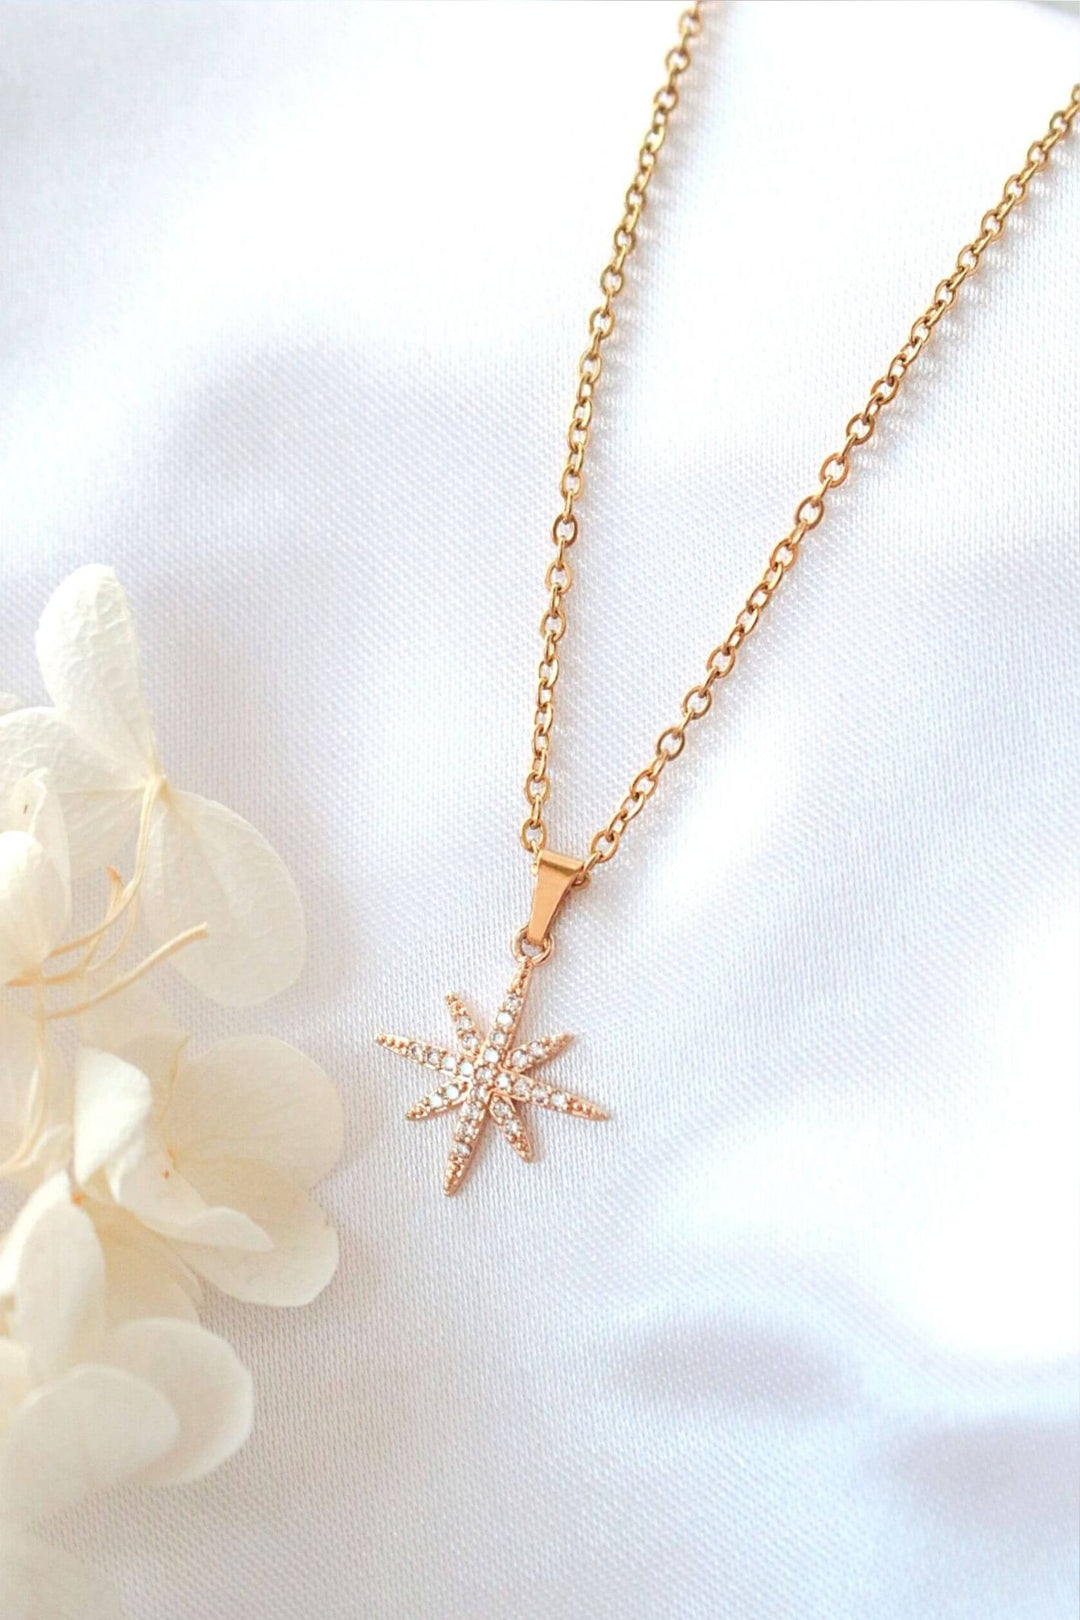 Polaris Star 24K Gold Plated Necklace